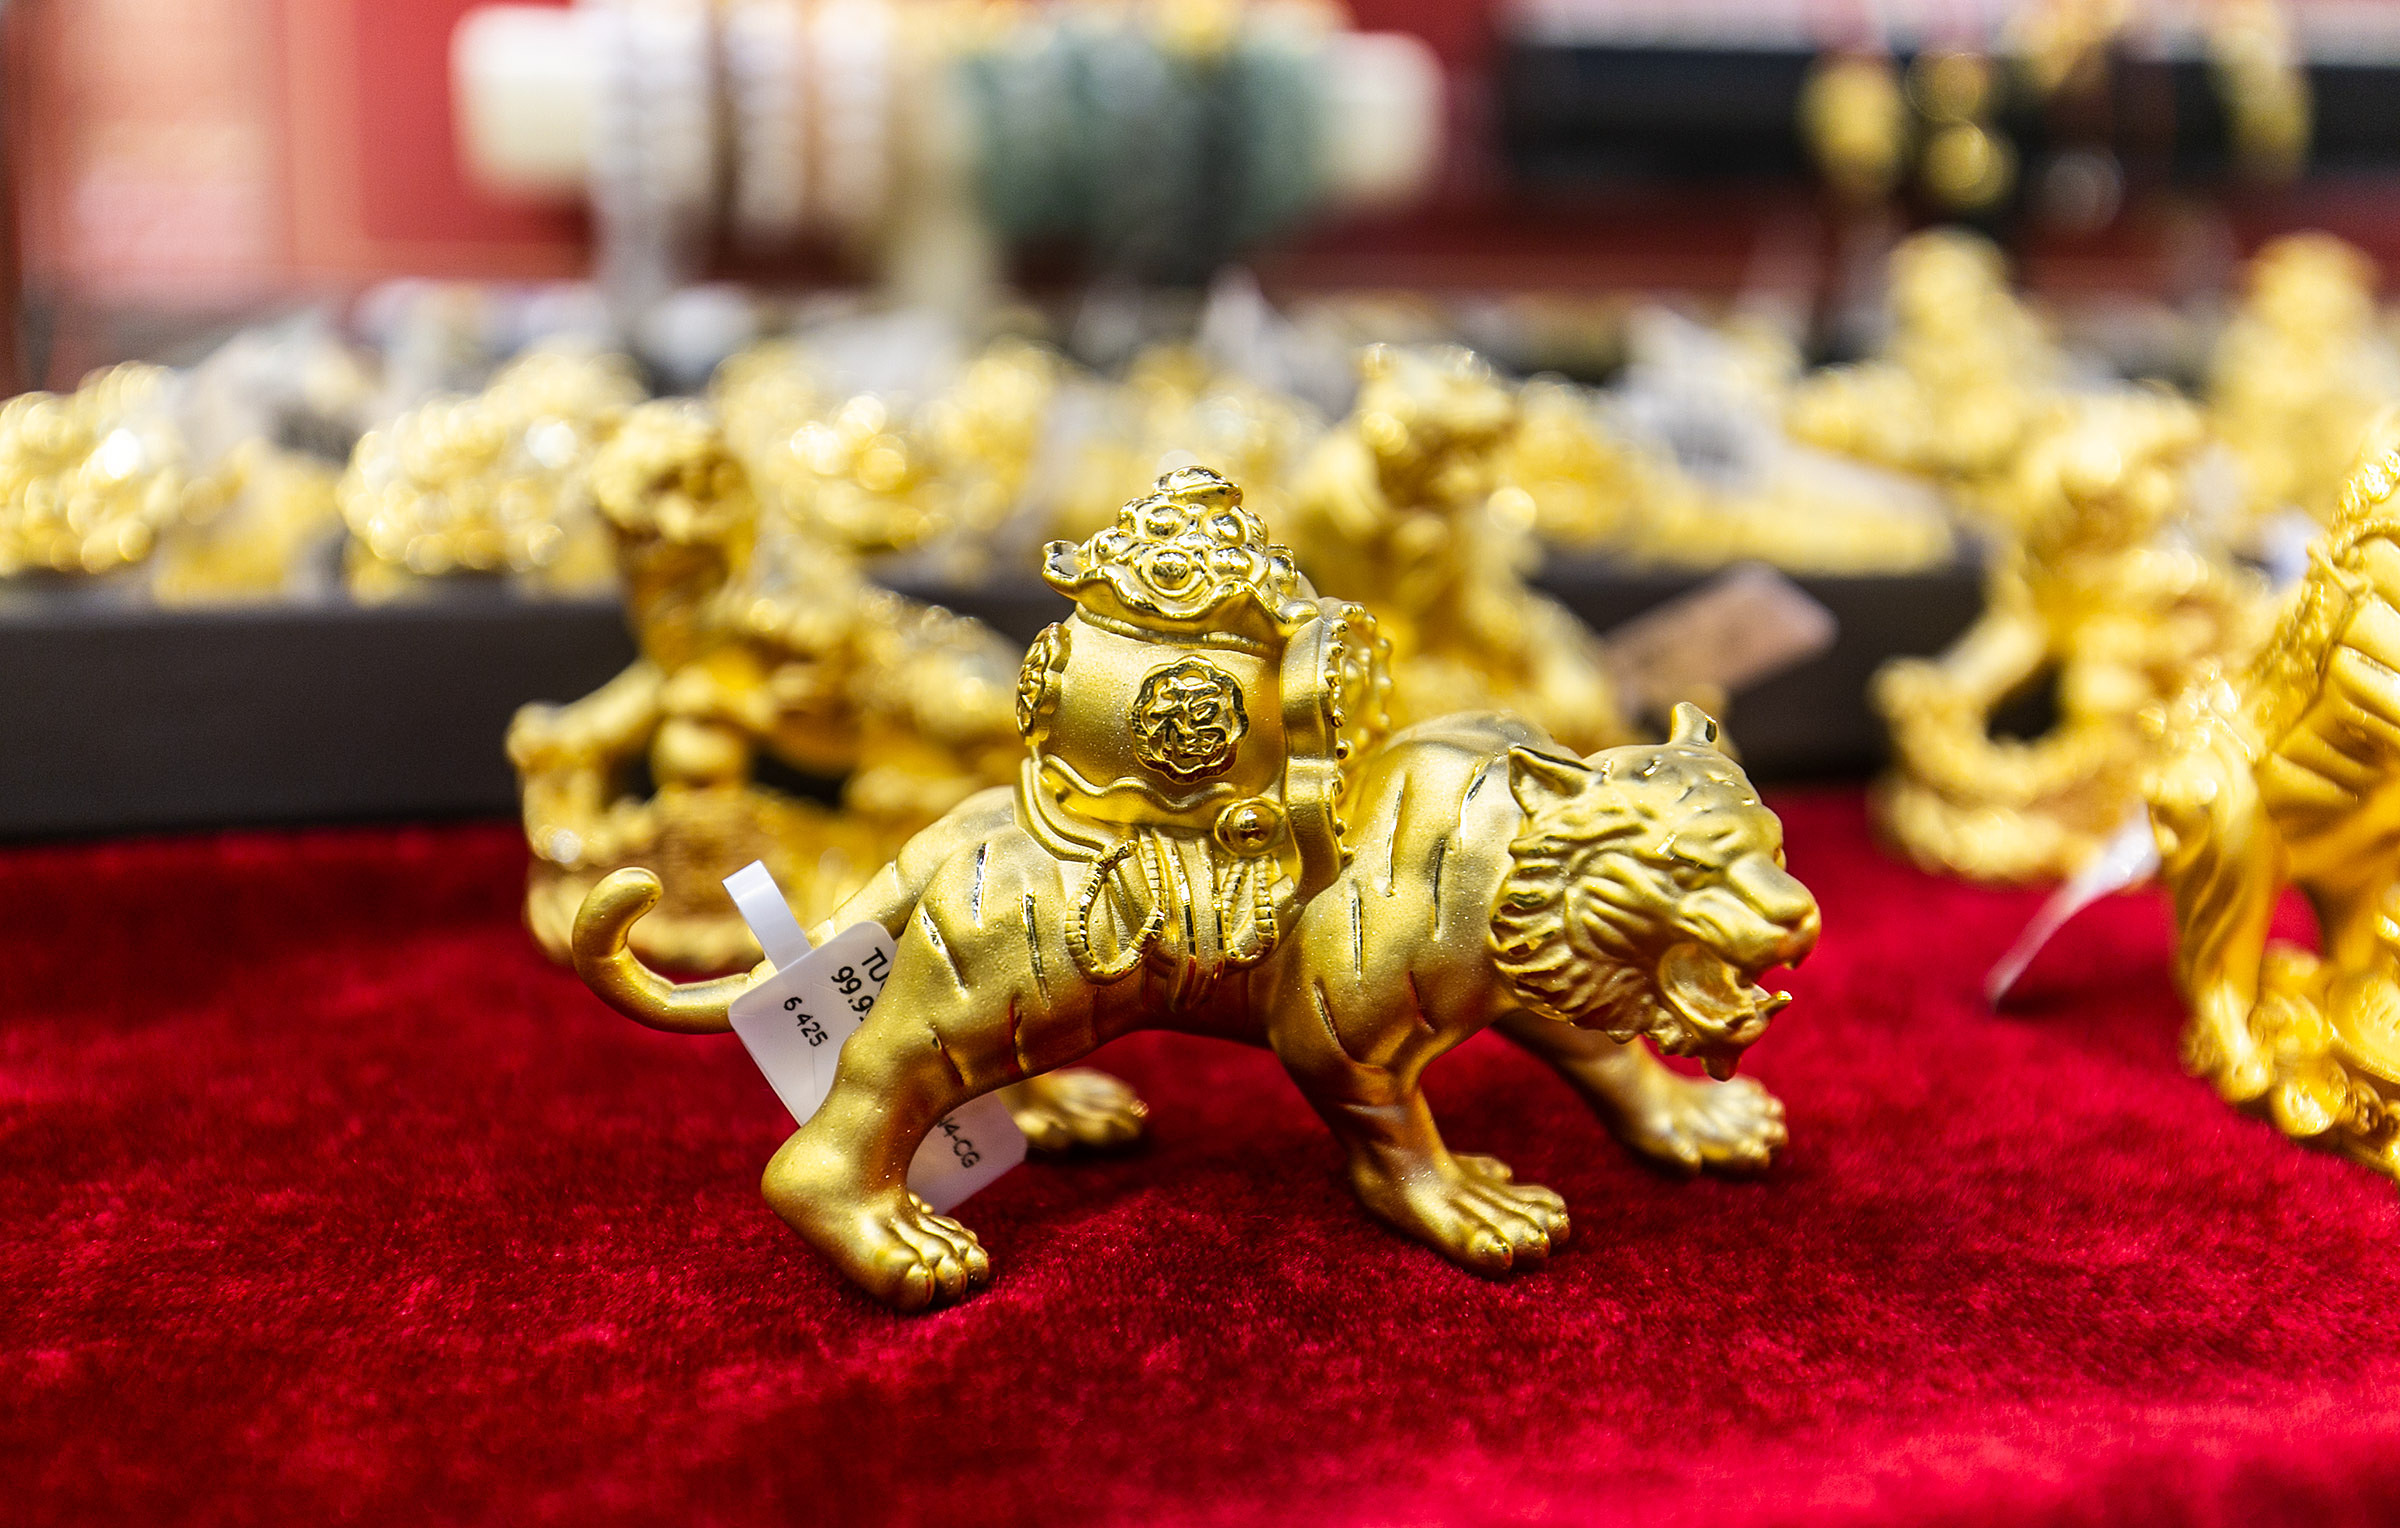 A golden statue of the tiger. Depending on its size, the statue is sold at VND1.3 million (around $60) and VND2.7 million.